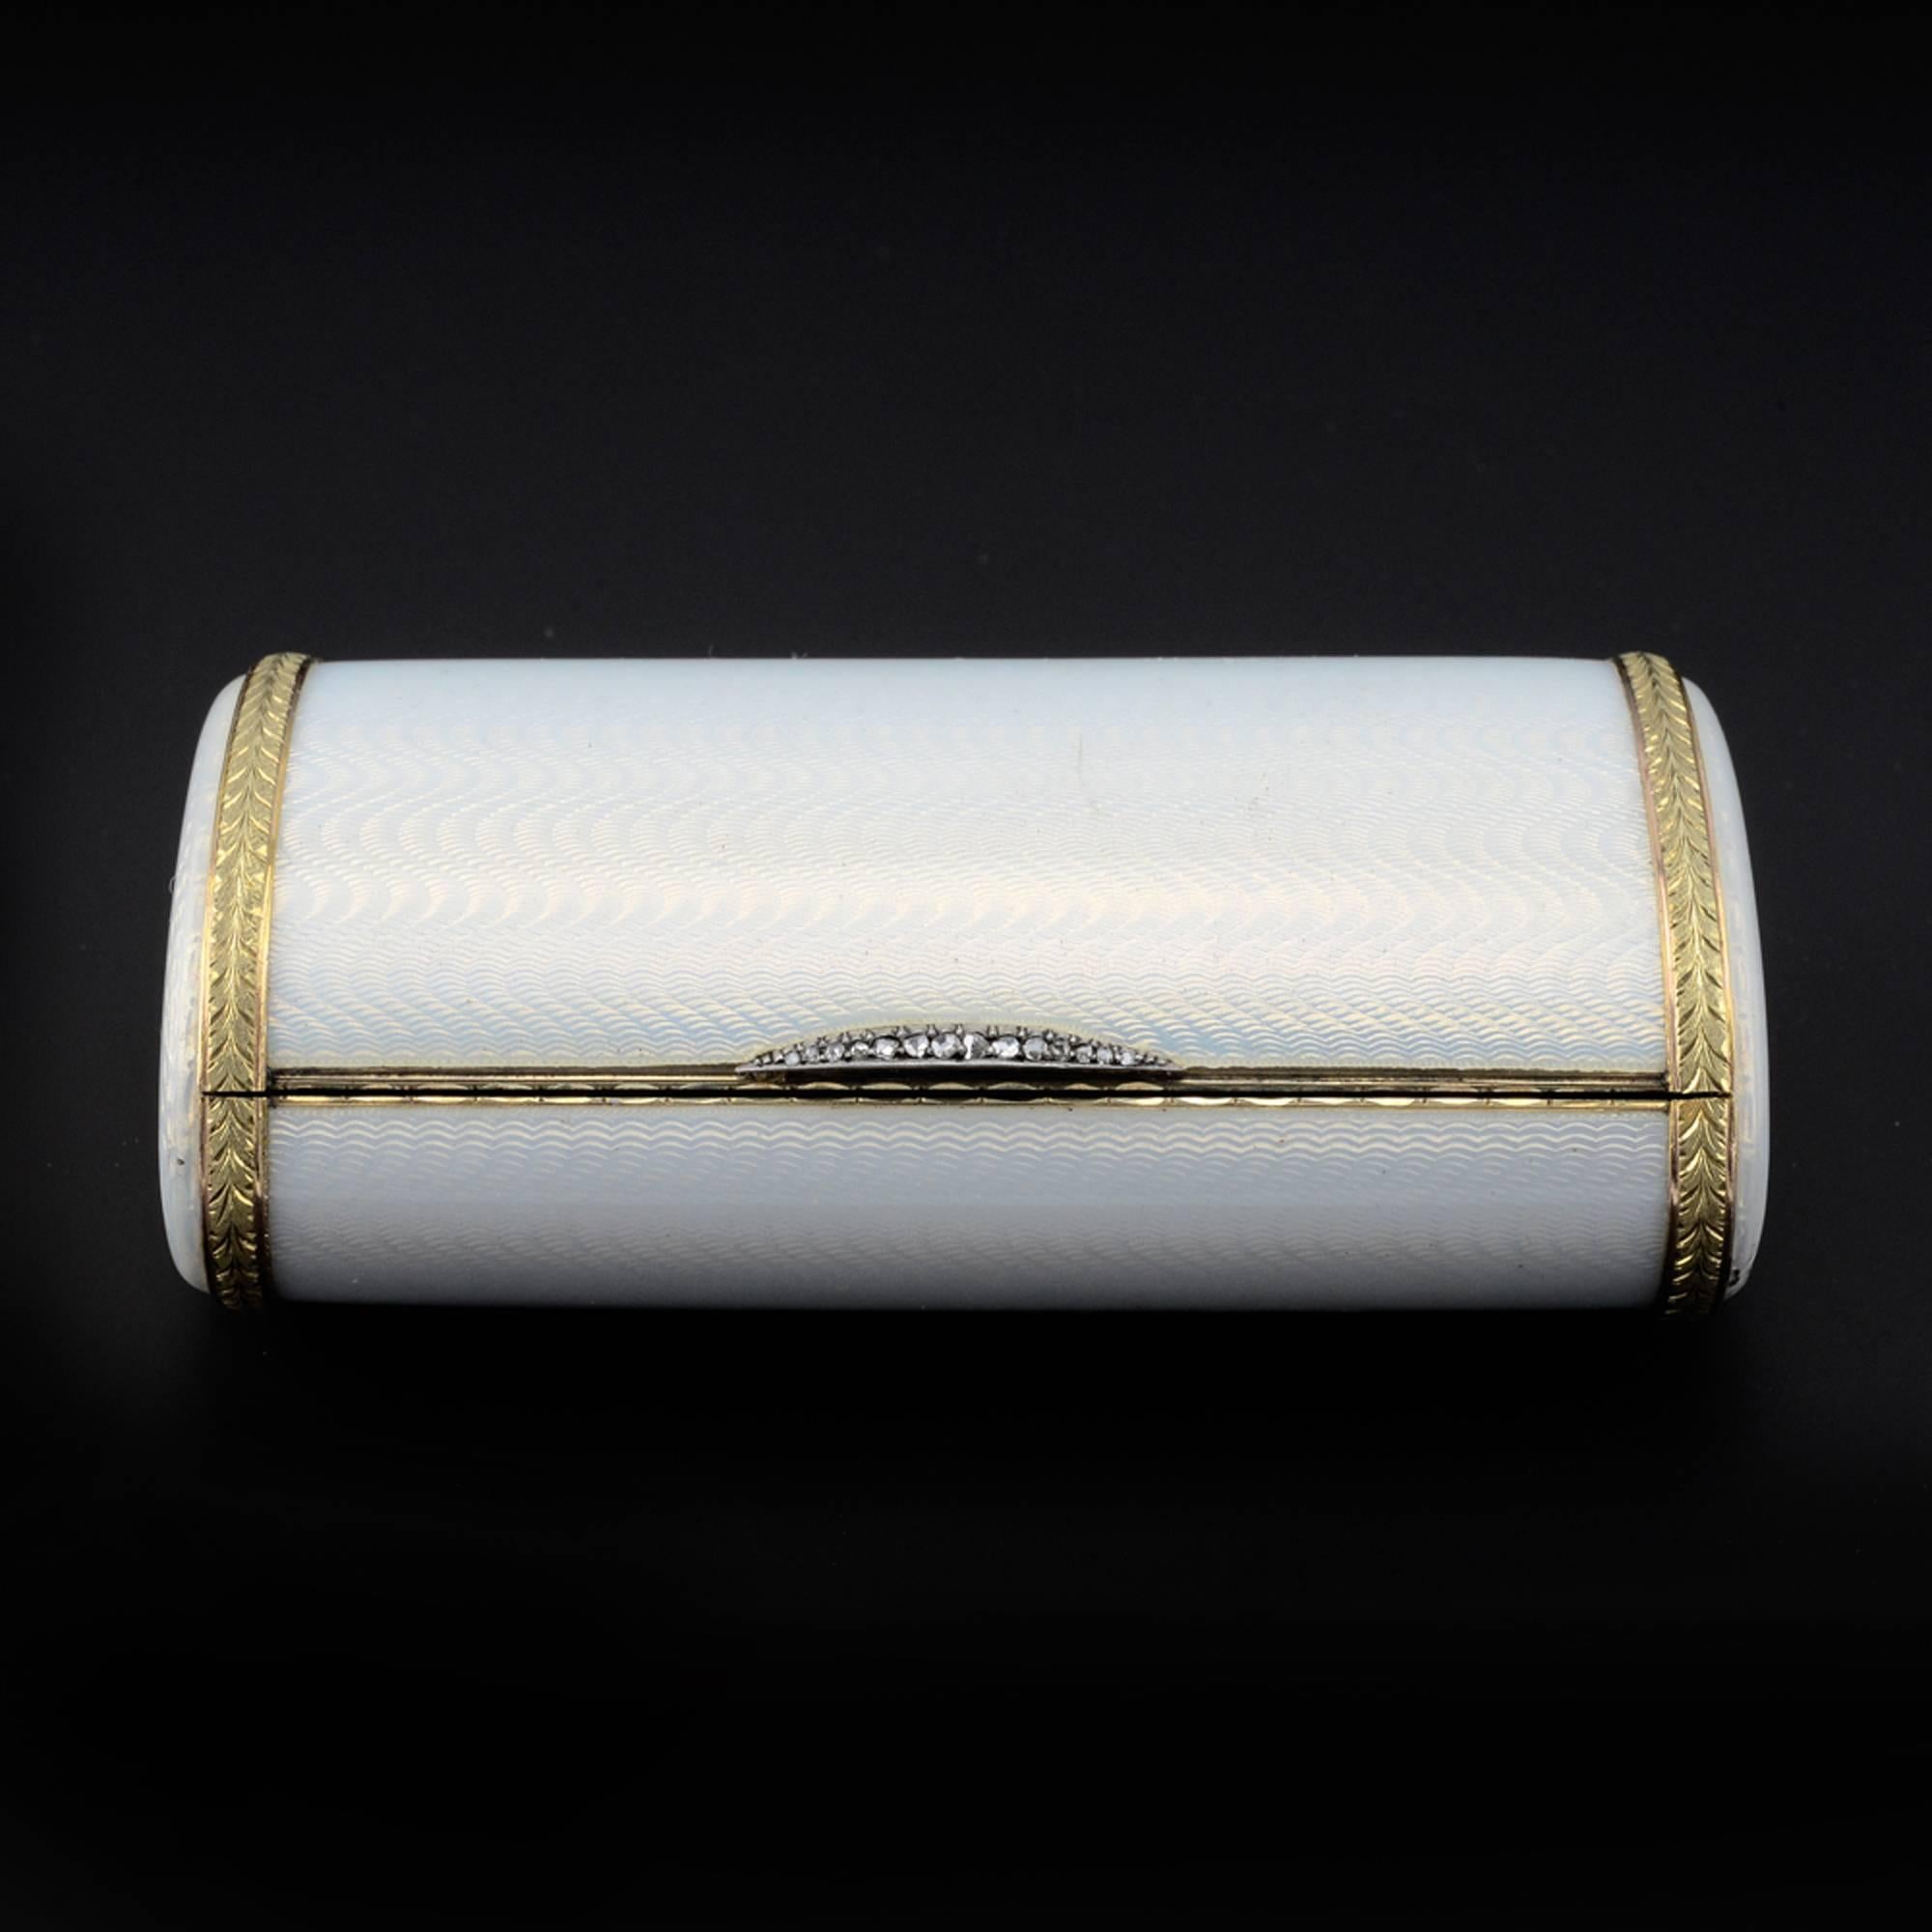 An elegant Fabergé jeweled varicolor gold-mounted gilded silver and guilloché enamel cigarette case, workmaster Henrik Wigström, ST Petersburg, circa 1904-1908. Of oval section, enameled translucent oyster white over a moiré engine-turned